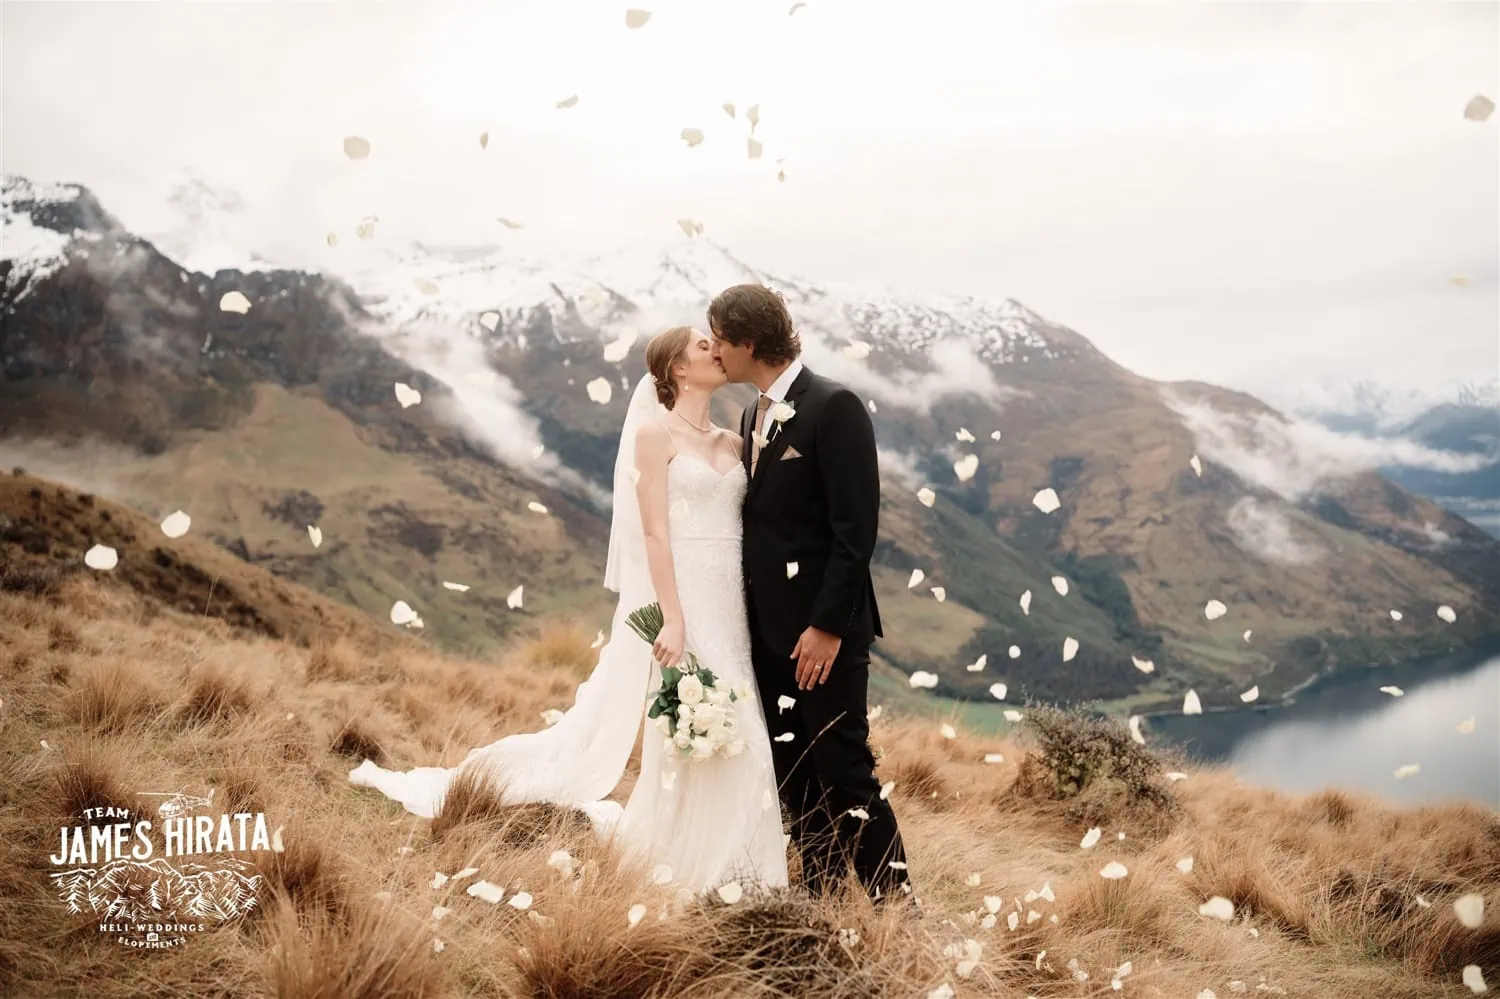 Hannah and Ross eloped on top of a mountain in Queenstown, New Zealand, sharing a romantic kiss as confetti surrounded them.